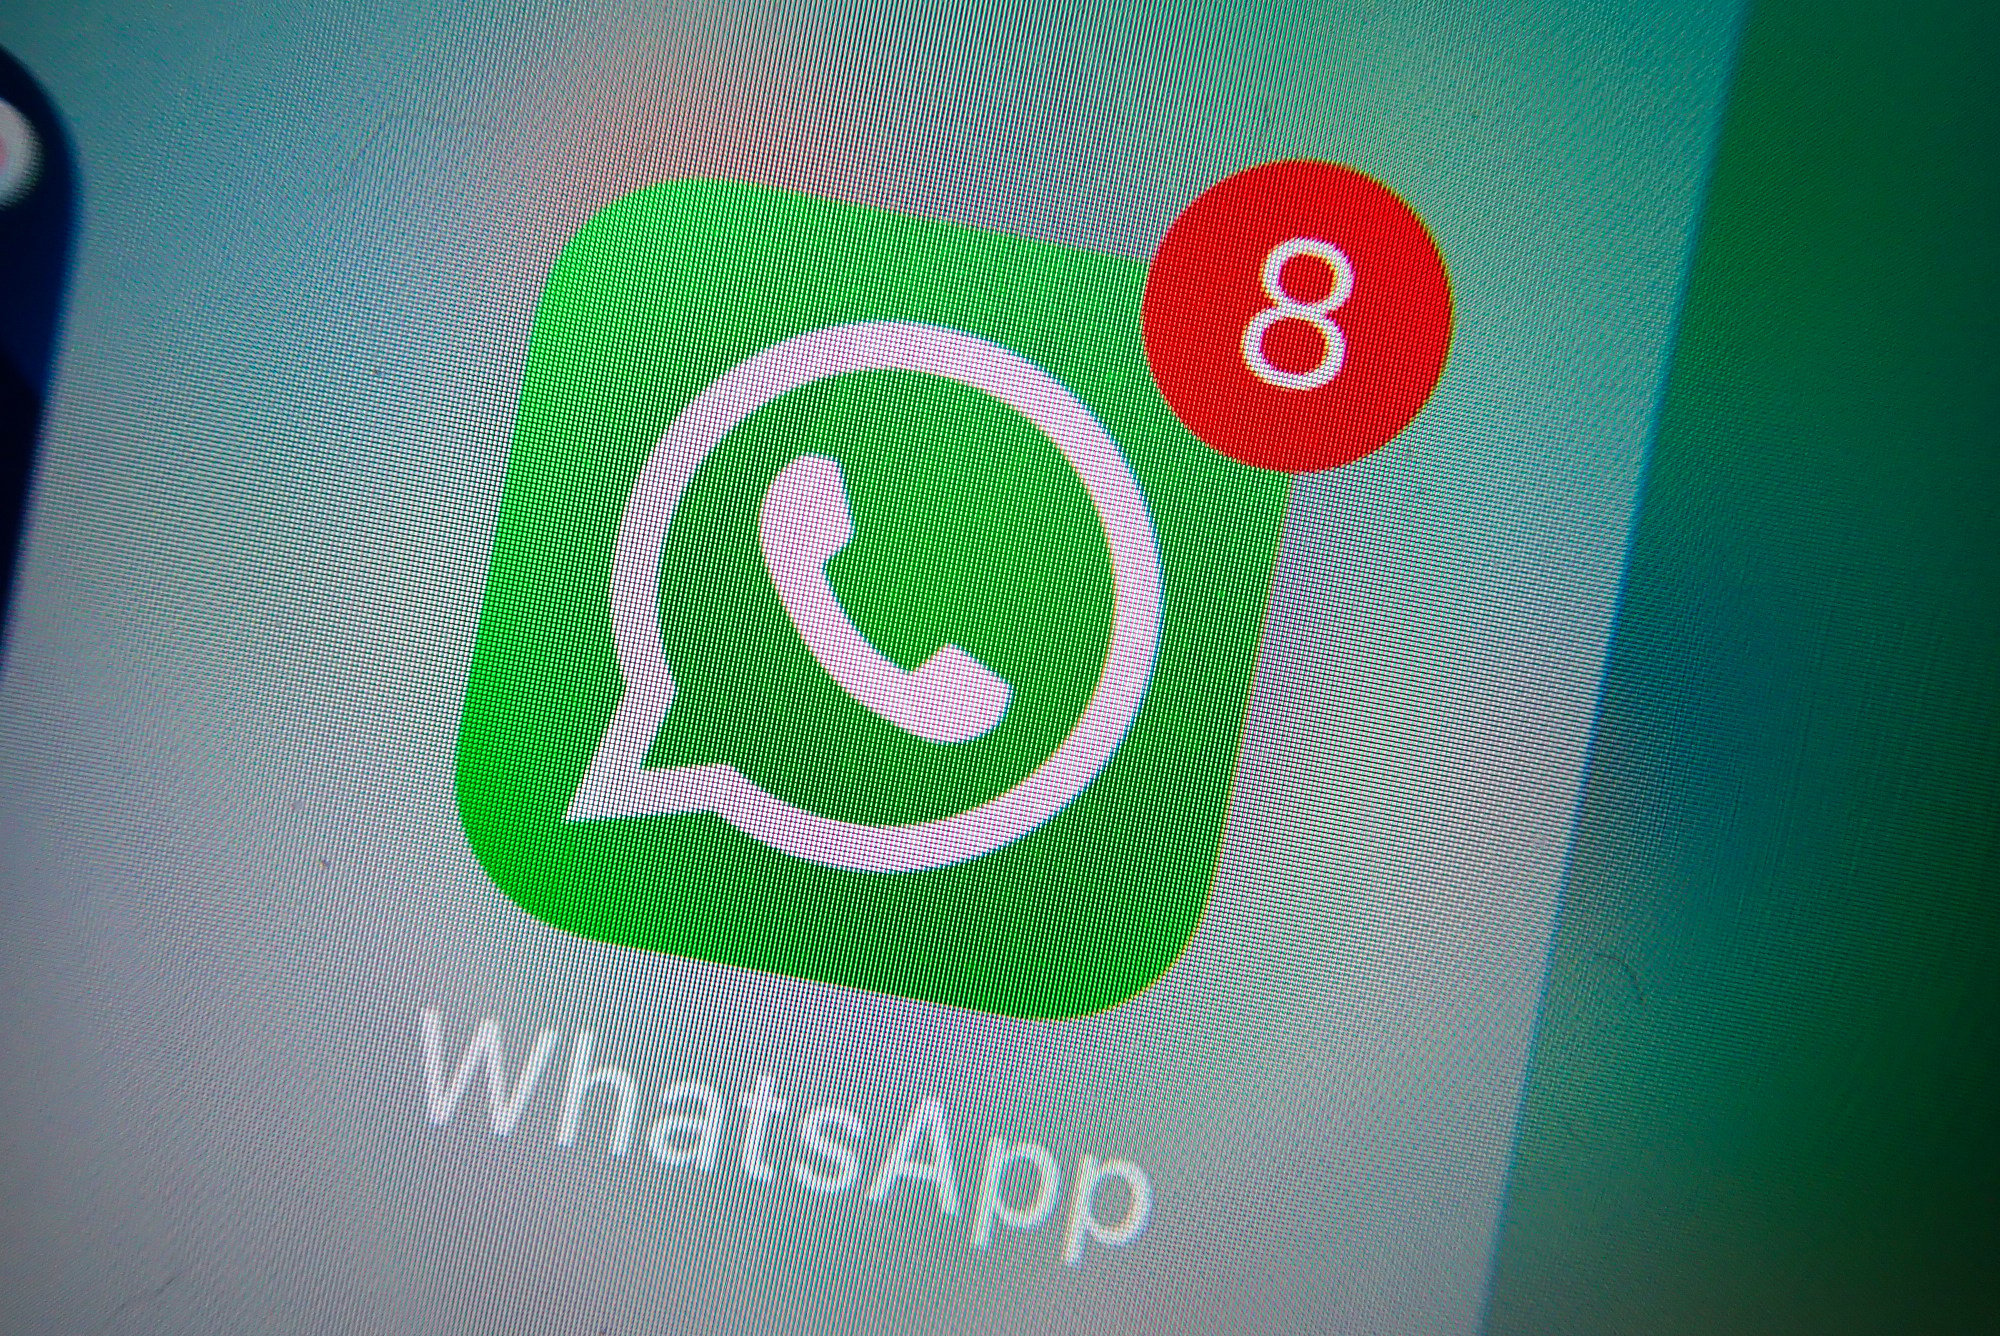 Fraudsters befriended 60 per cent of the 810 victims in August via WhatsApp messages. Photo: Shutterstock